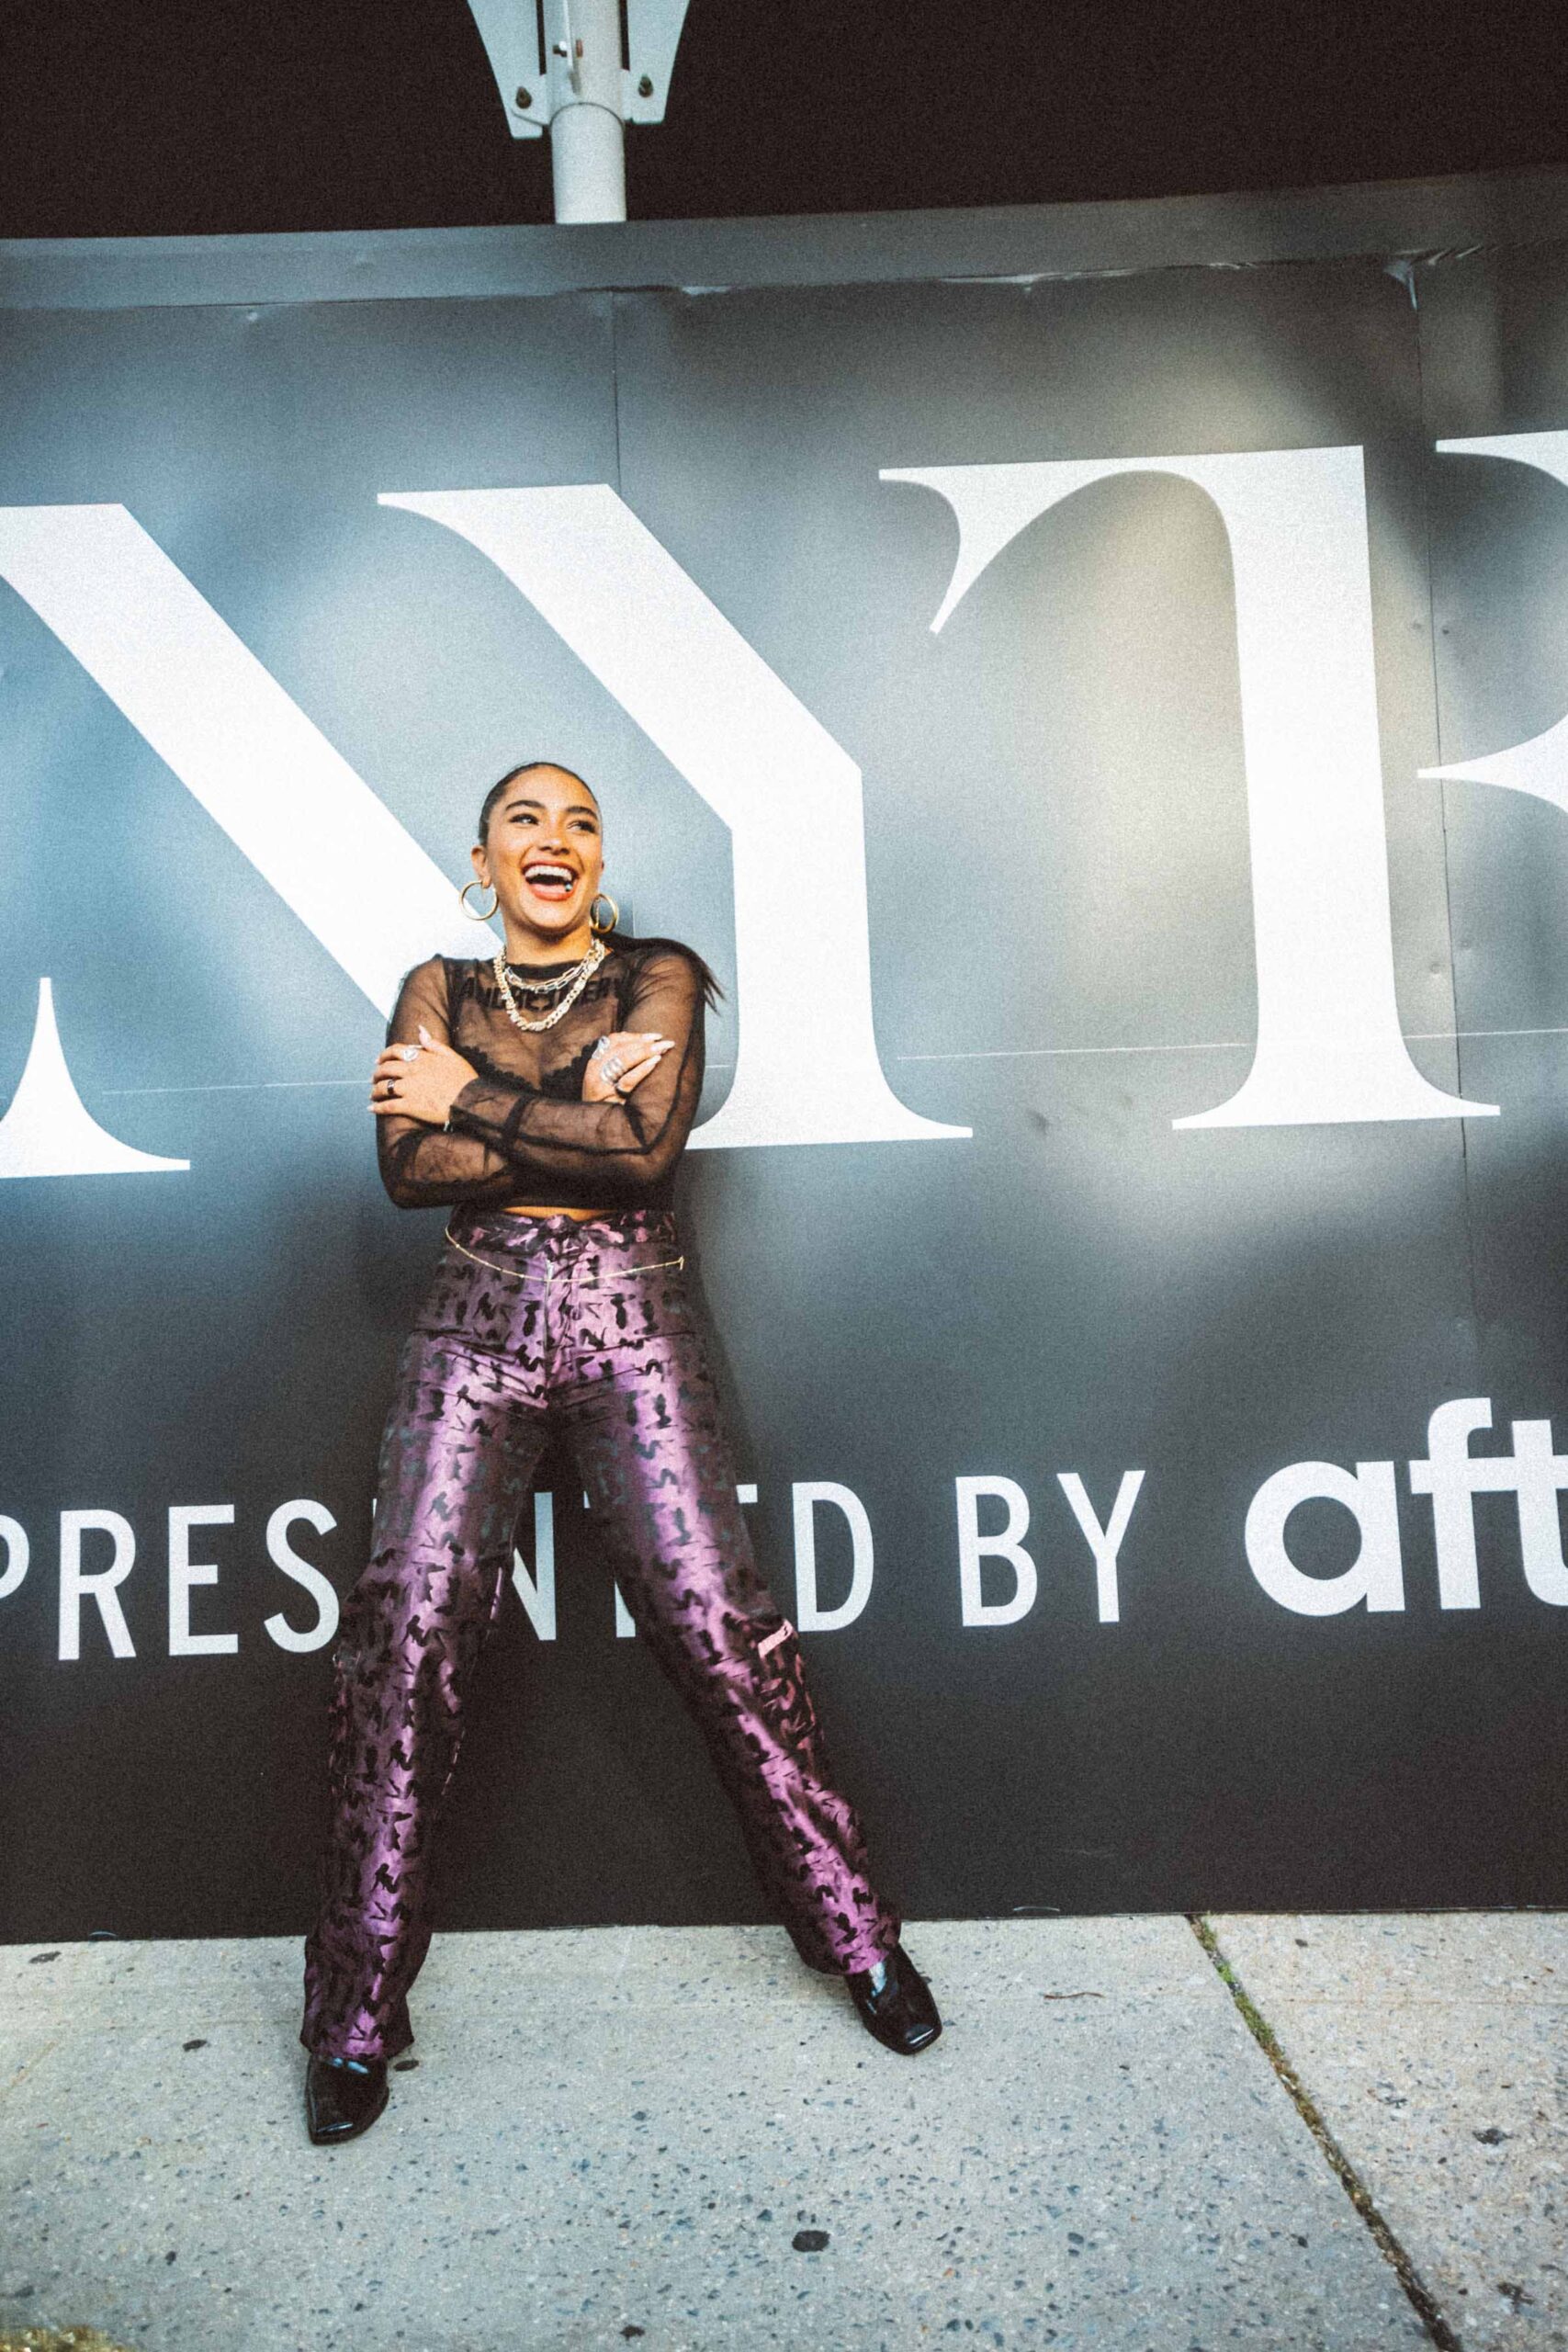 Sienna Mae Gomez in front of NYFW billboard, girl wearing purple pants and laughing